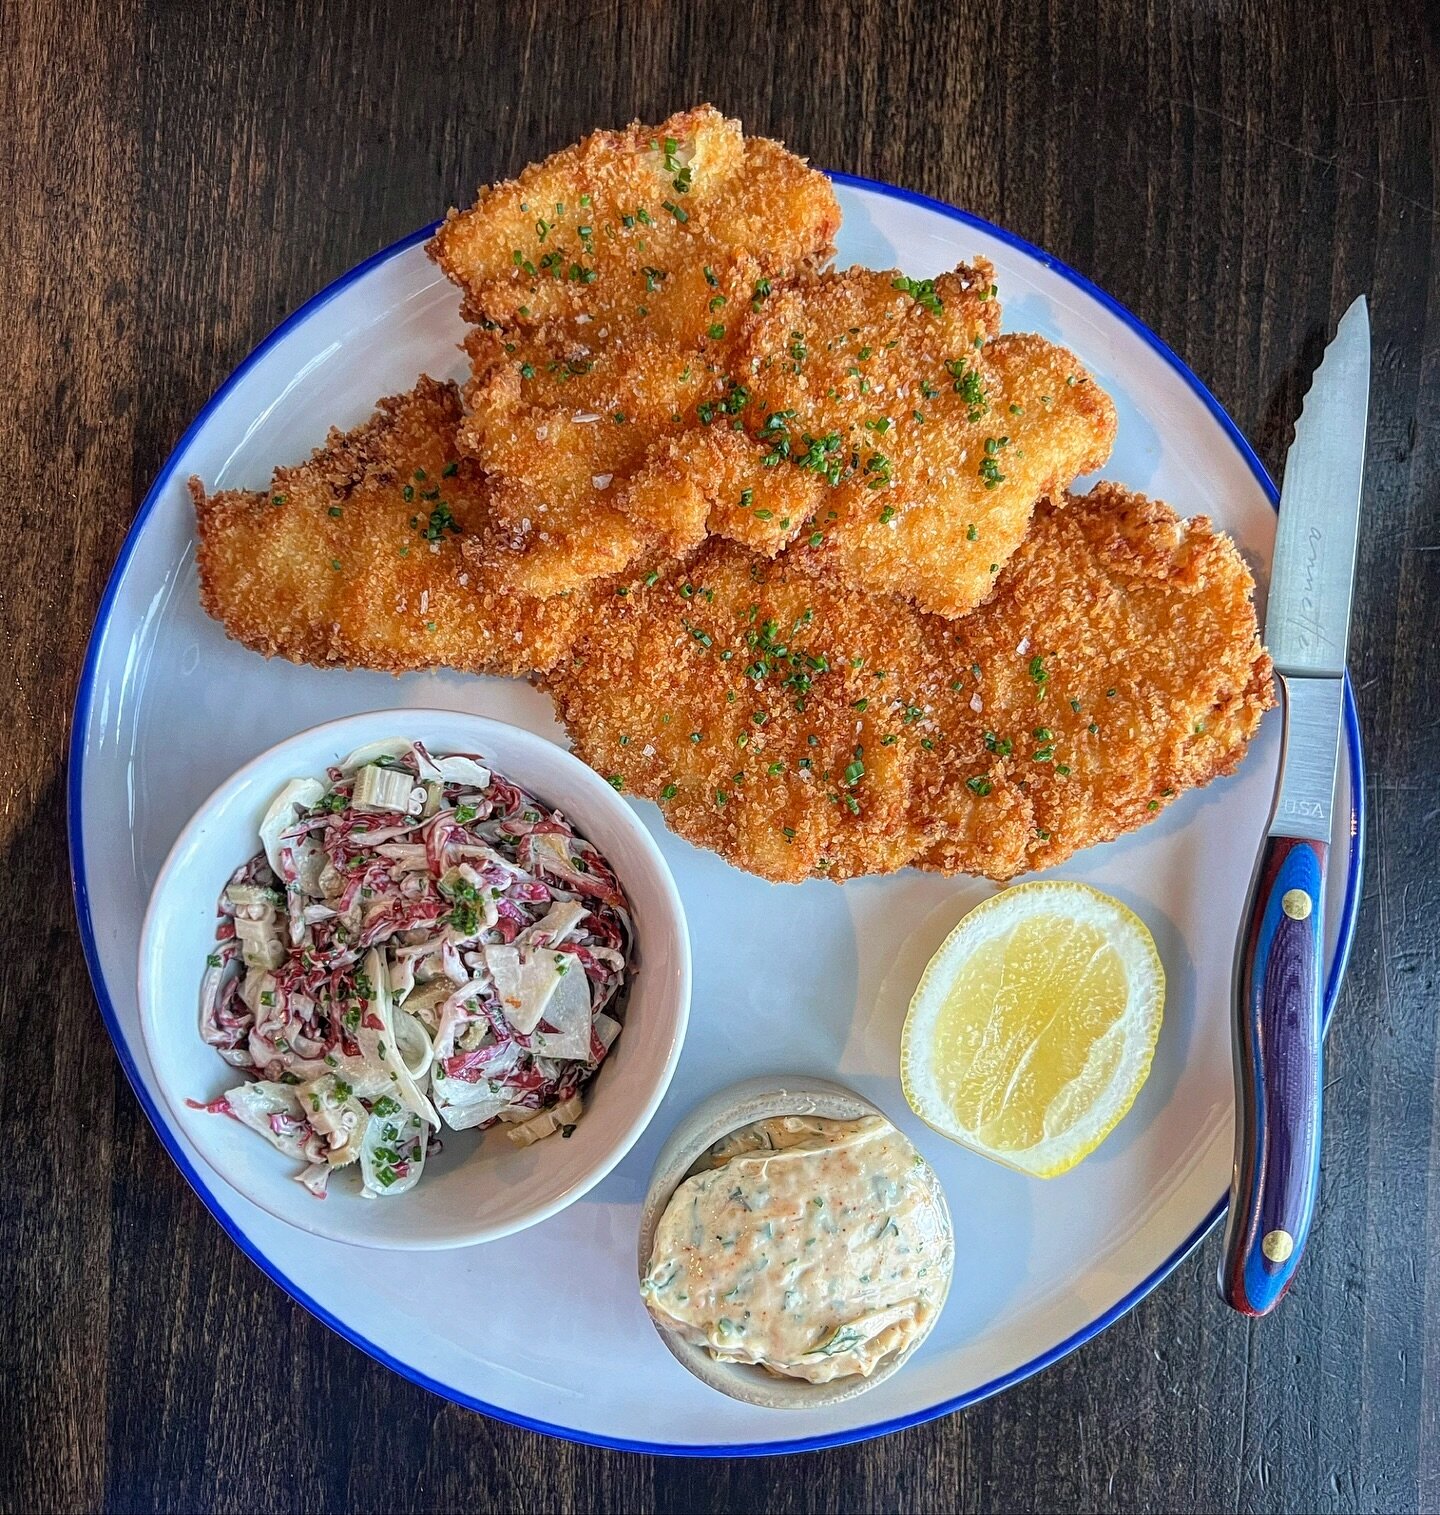 Maybe it&rsquo;s lent. Maybe it&rsquo;s eating fried fish sandwiches at all our favorites spots latley or maybe it&rsquo;s because this was one of my favorite dishes last year&hellip; either way! FISH SCHNITZ is back (in limited amounts 🫣) with our 